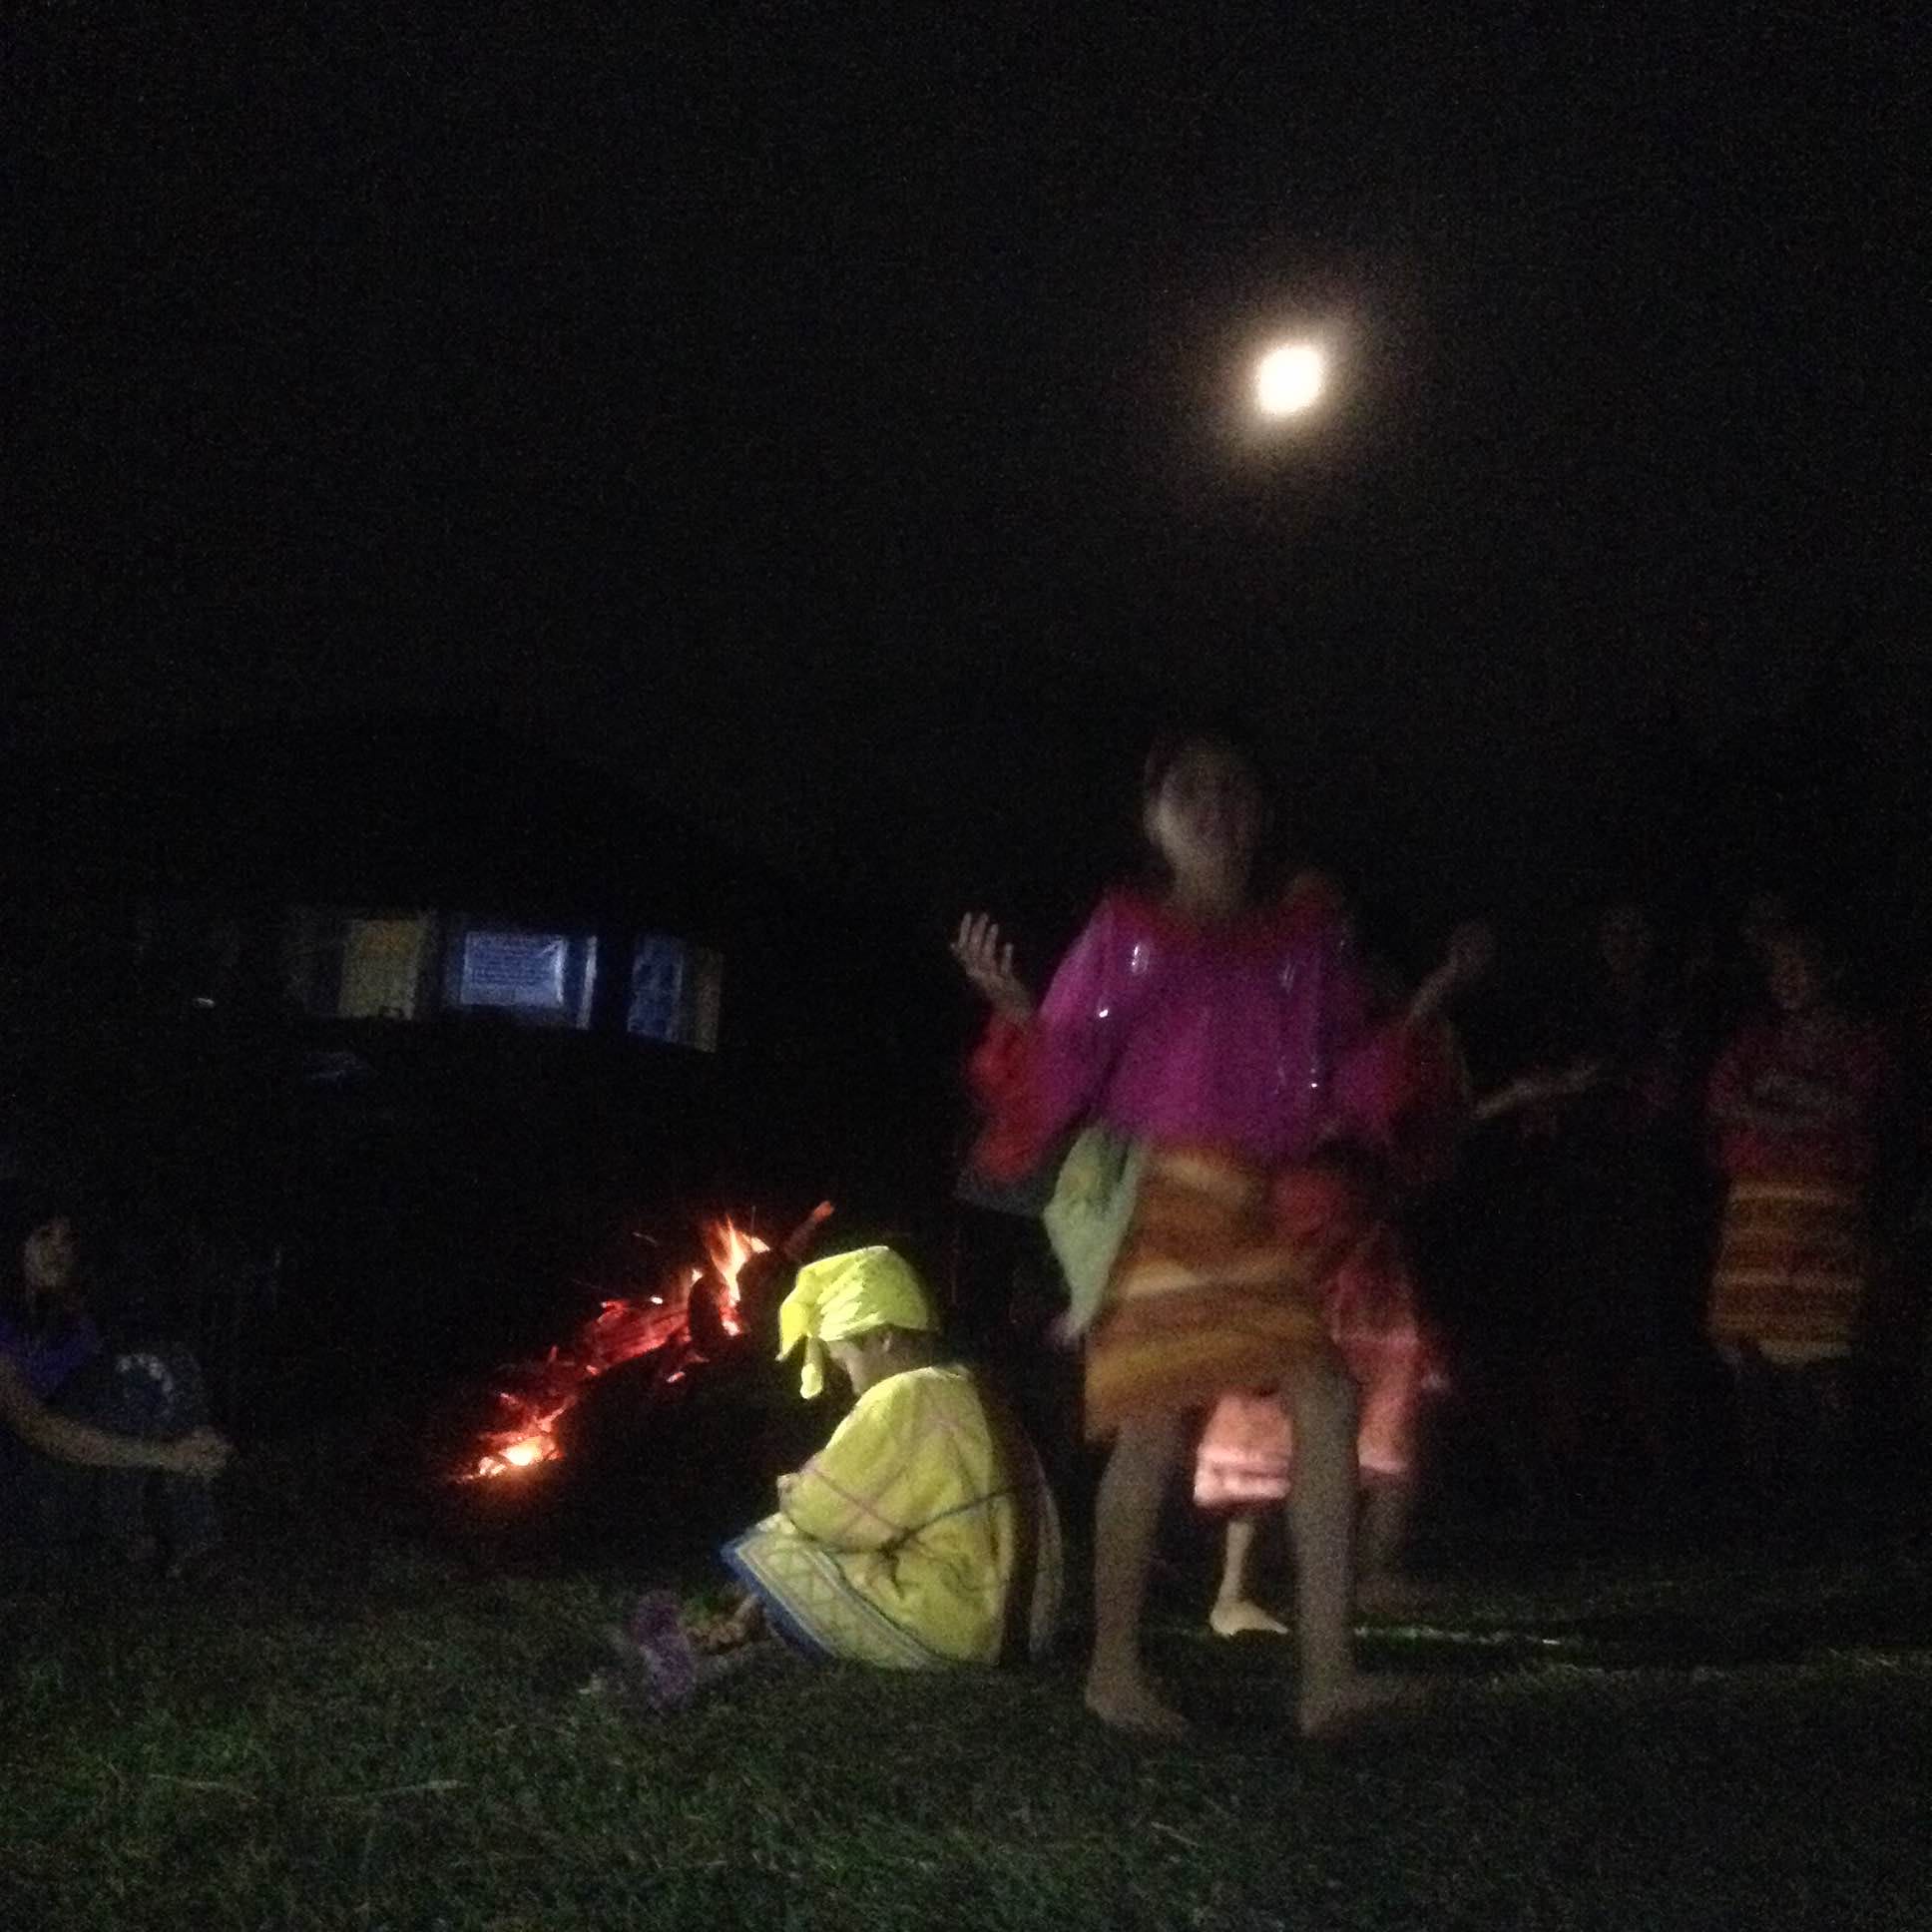 Community exchange before dinner: the children gave a delightful performance under a full moon. Photo by Trinket Constantino.